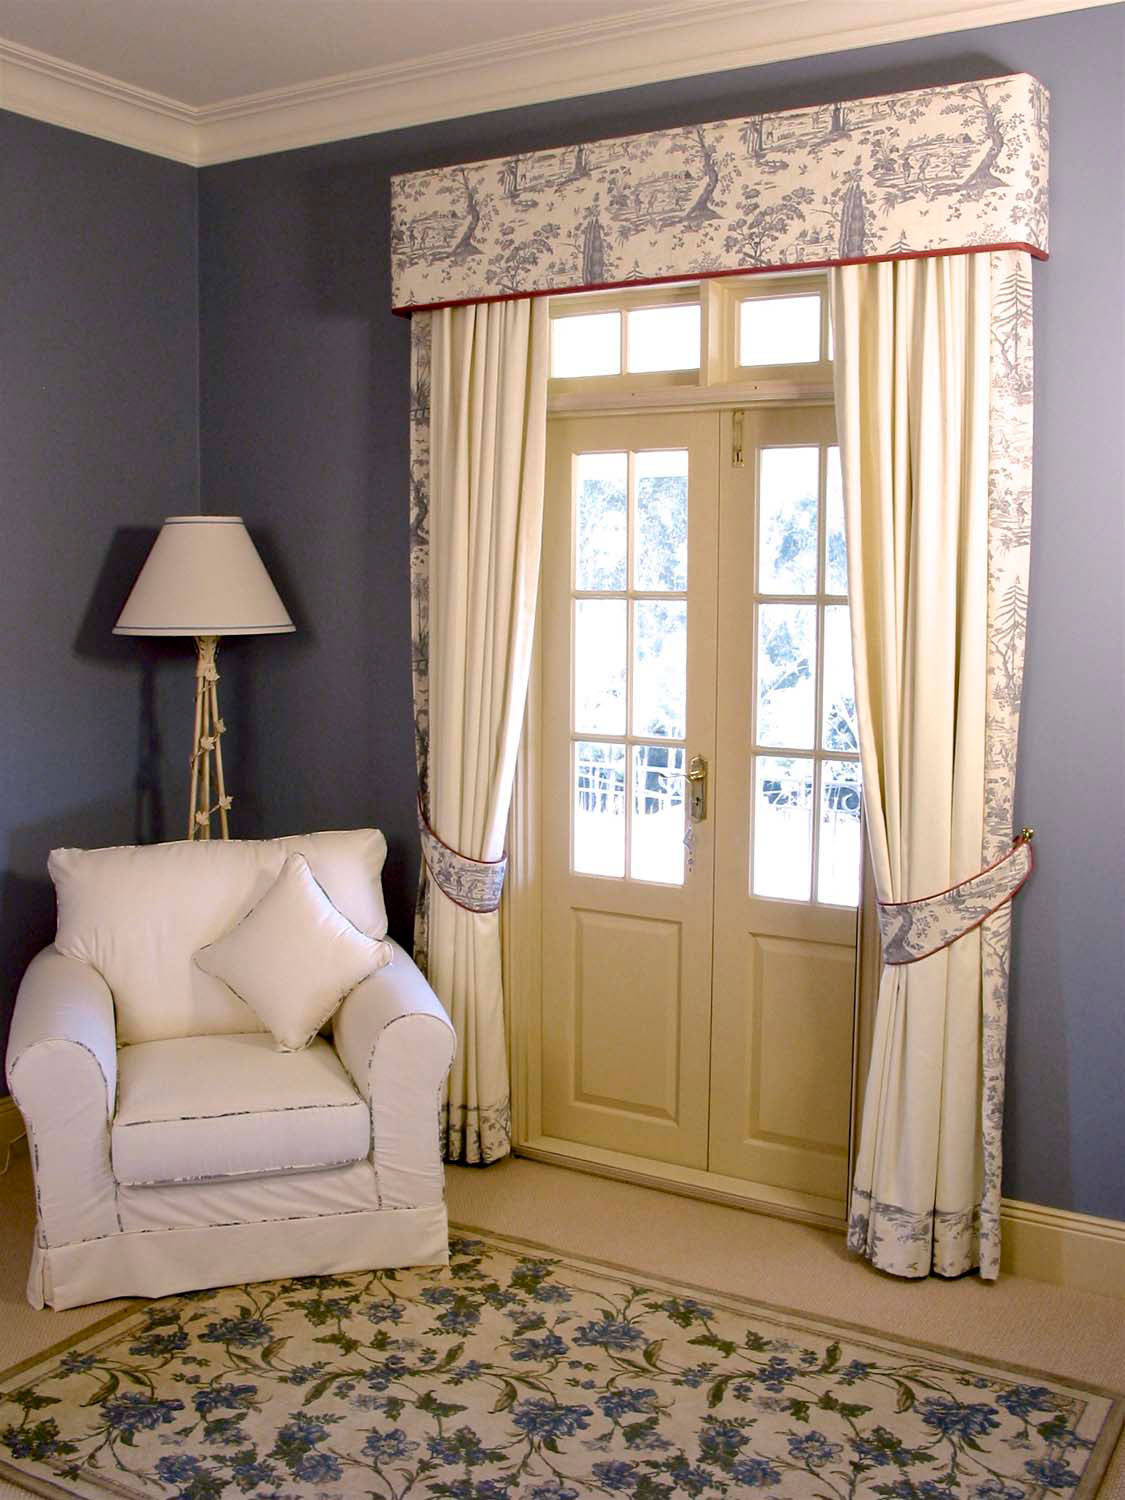 10 Gorgoues bedroom in french style with lamp, rug and curtains with fabric pelmet